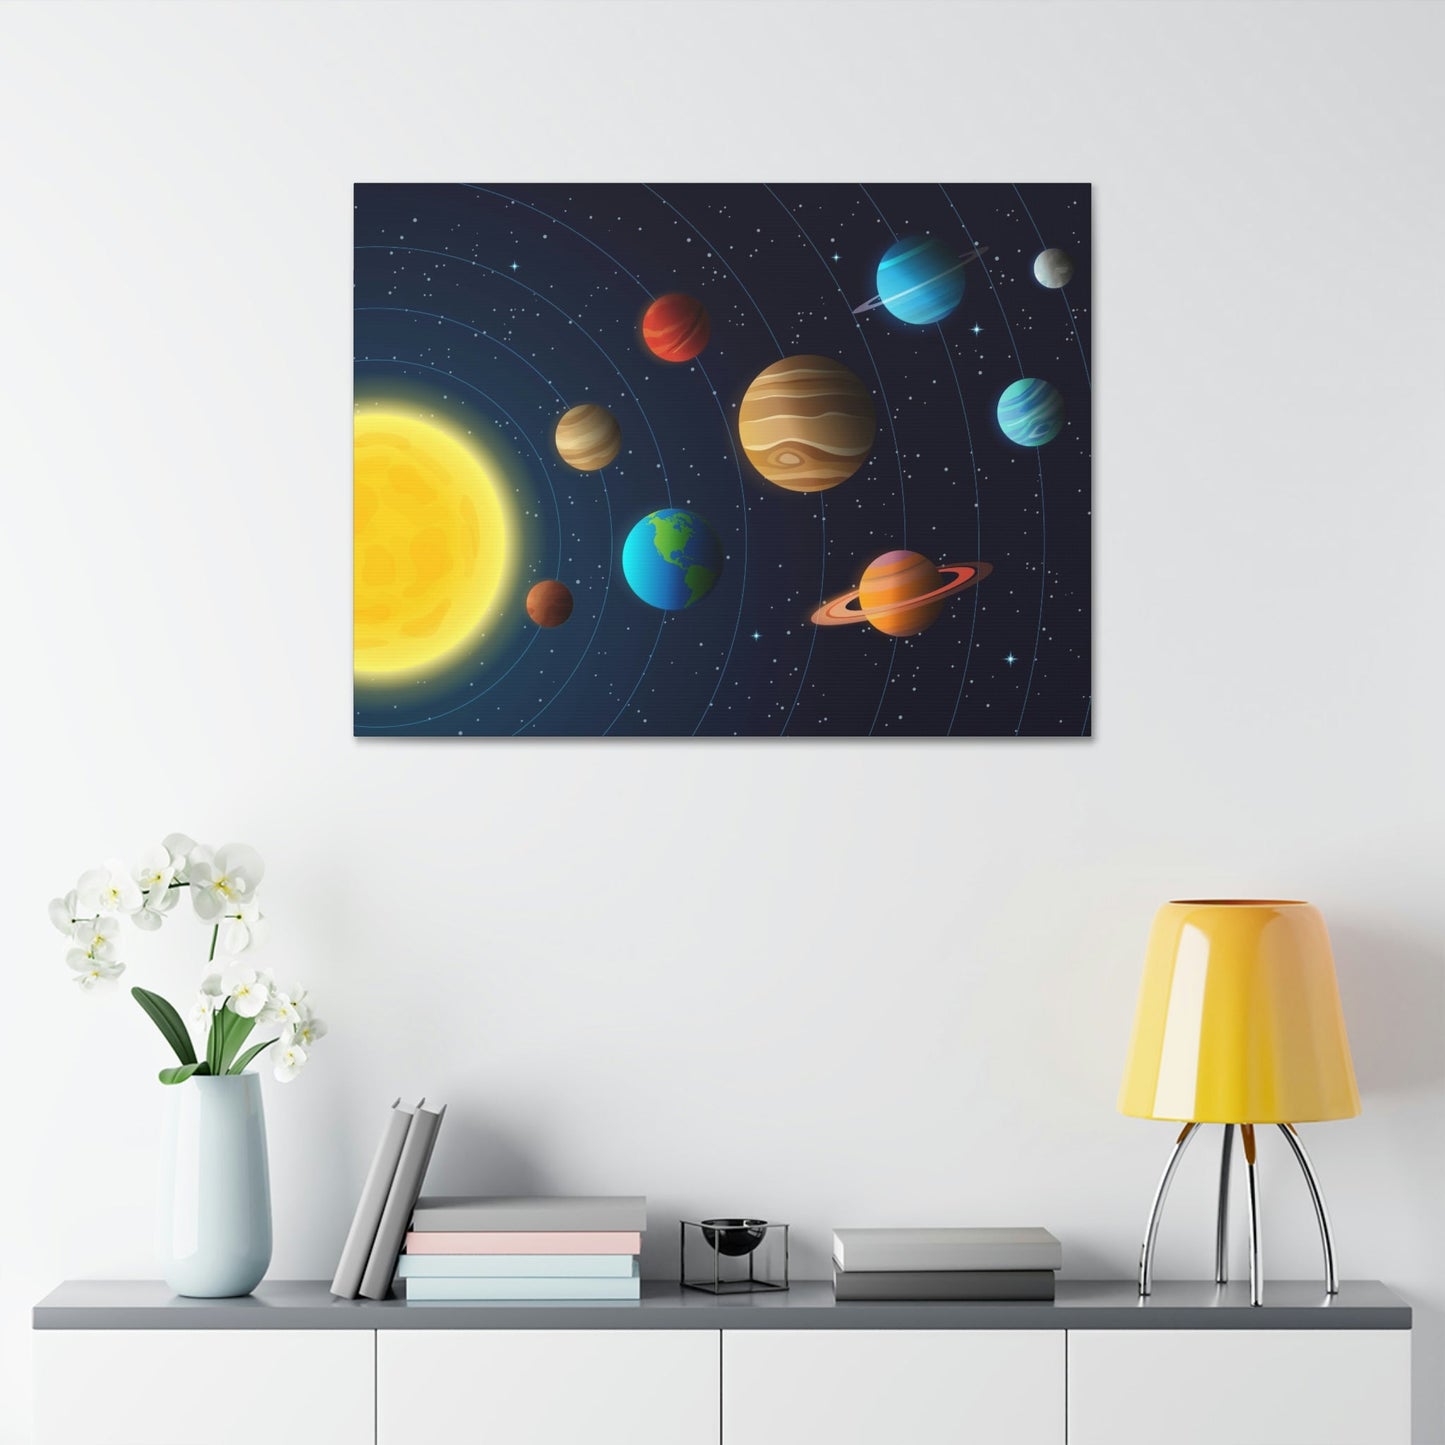 Space Odyssey: Natural Canvas Wall Art Featuring the Solar System in All Its Glory